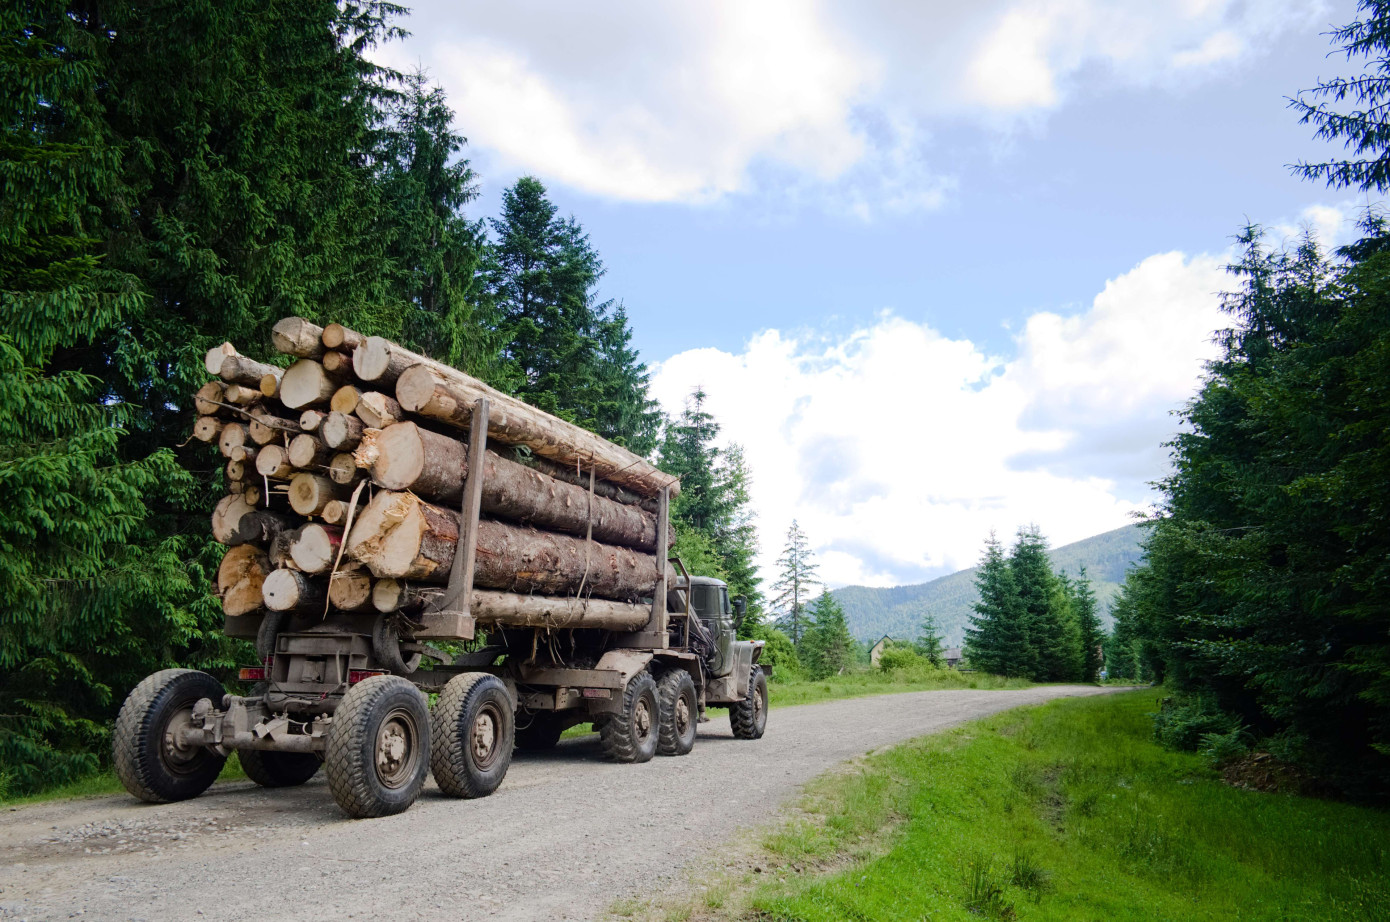 Energywood purchases surge in Finland, driven by logging residues trade